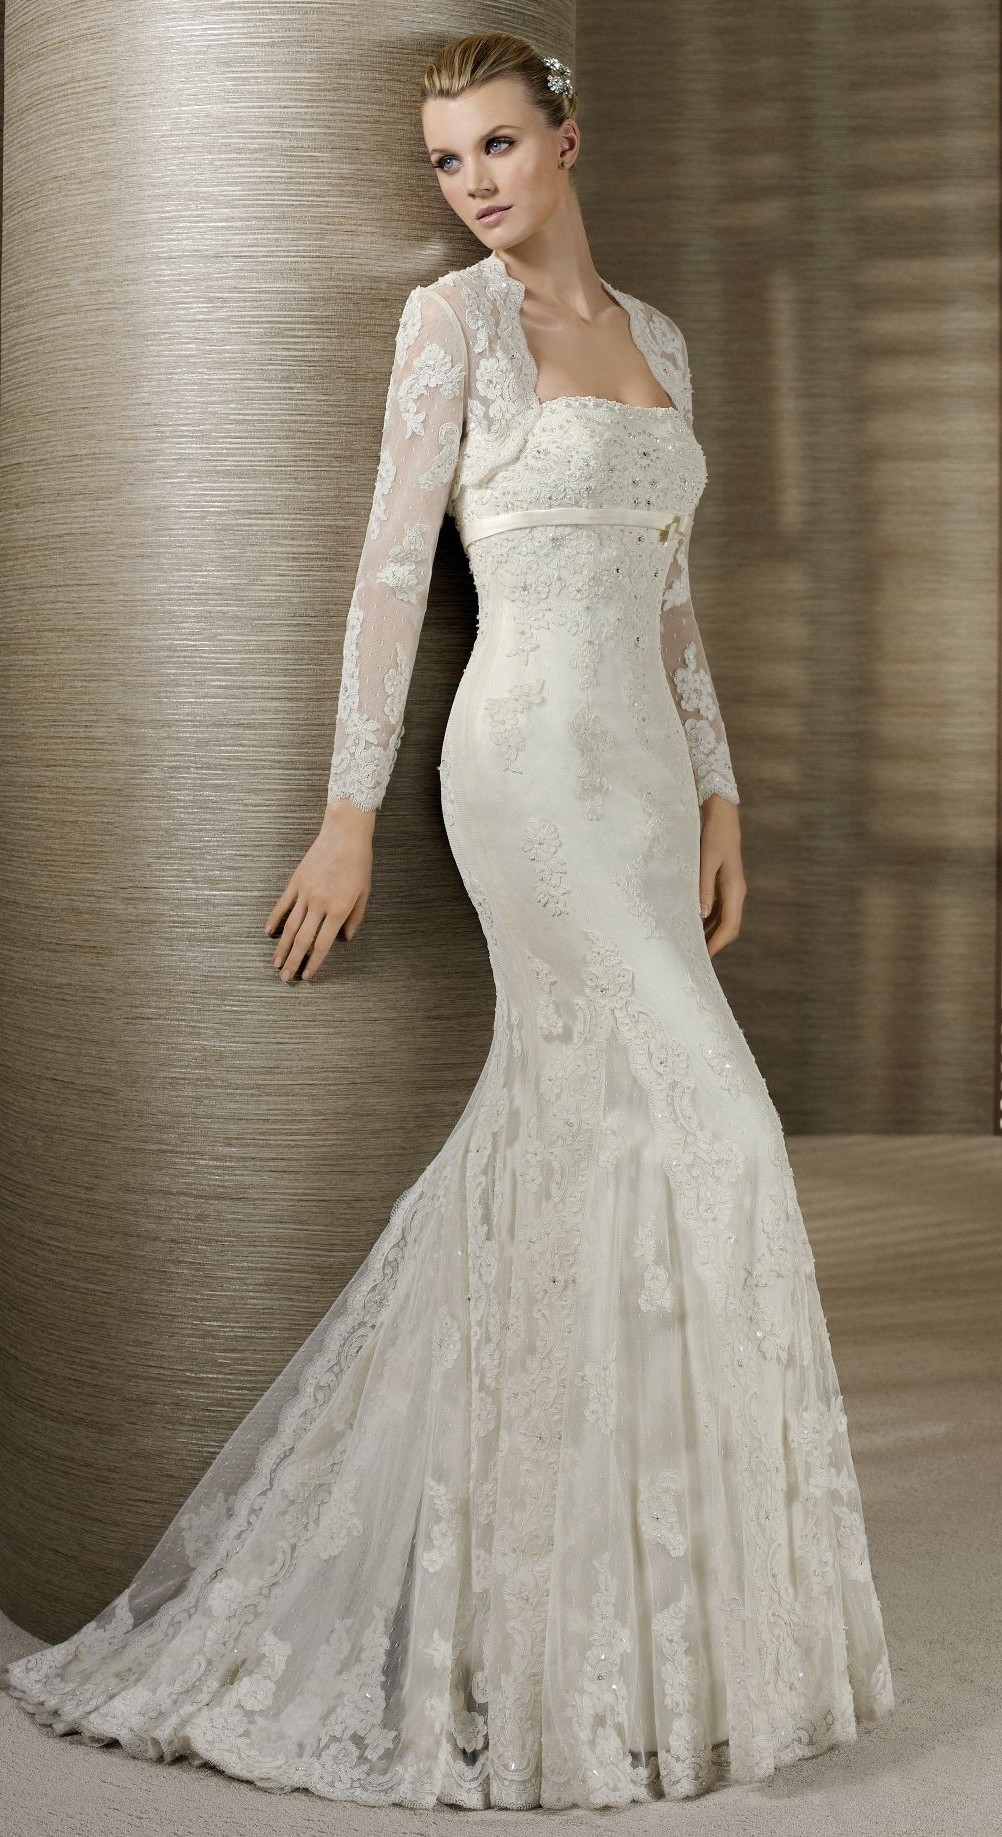 Top Simple But Elegant Wedding Dress of the decade Learn more here 